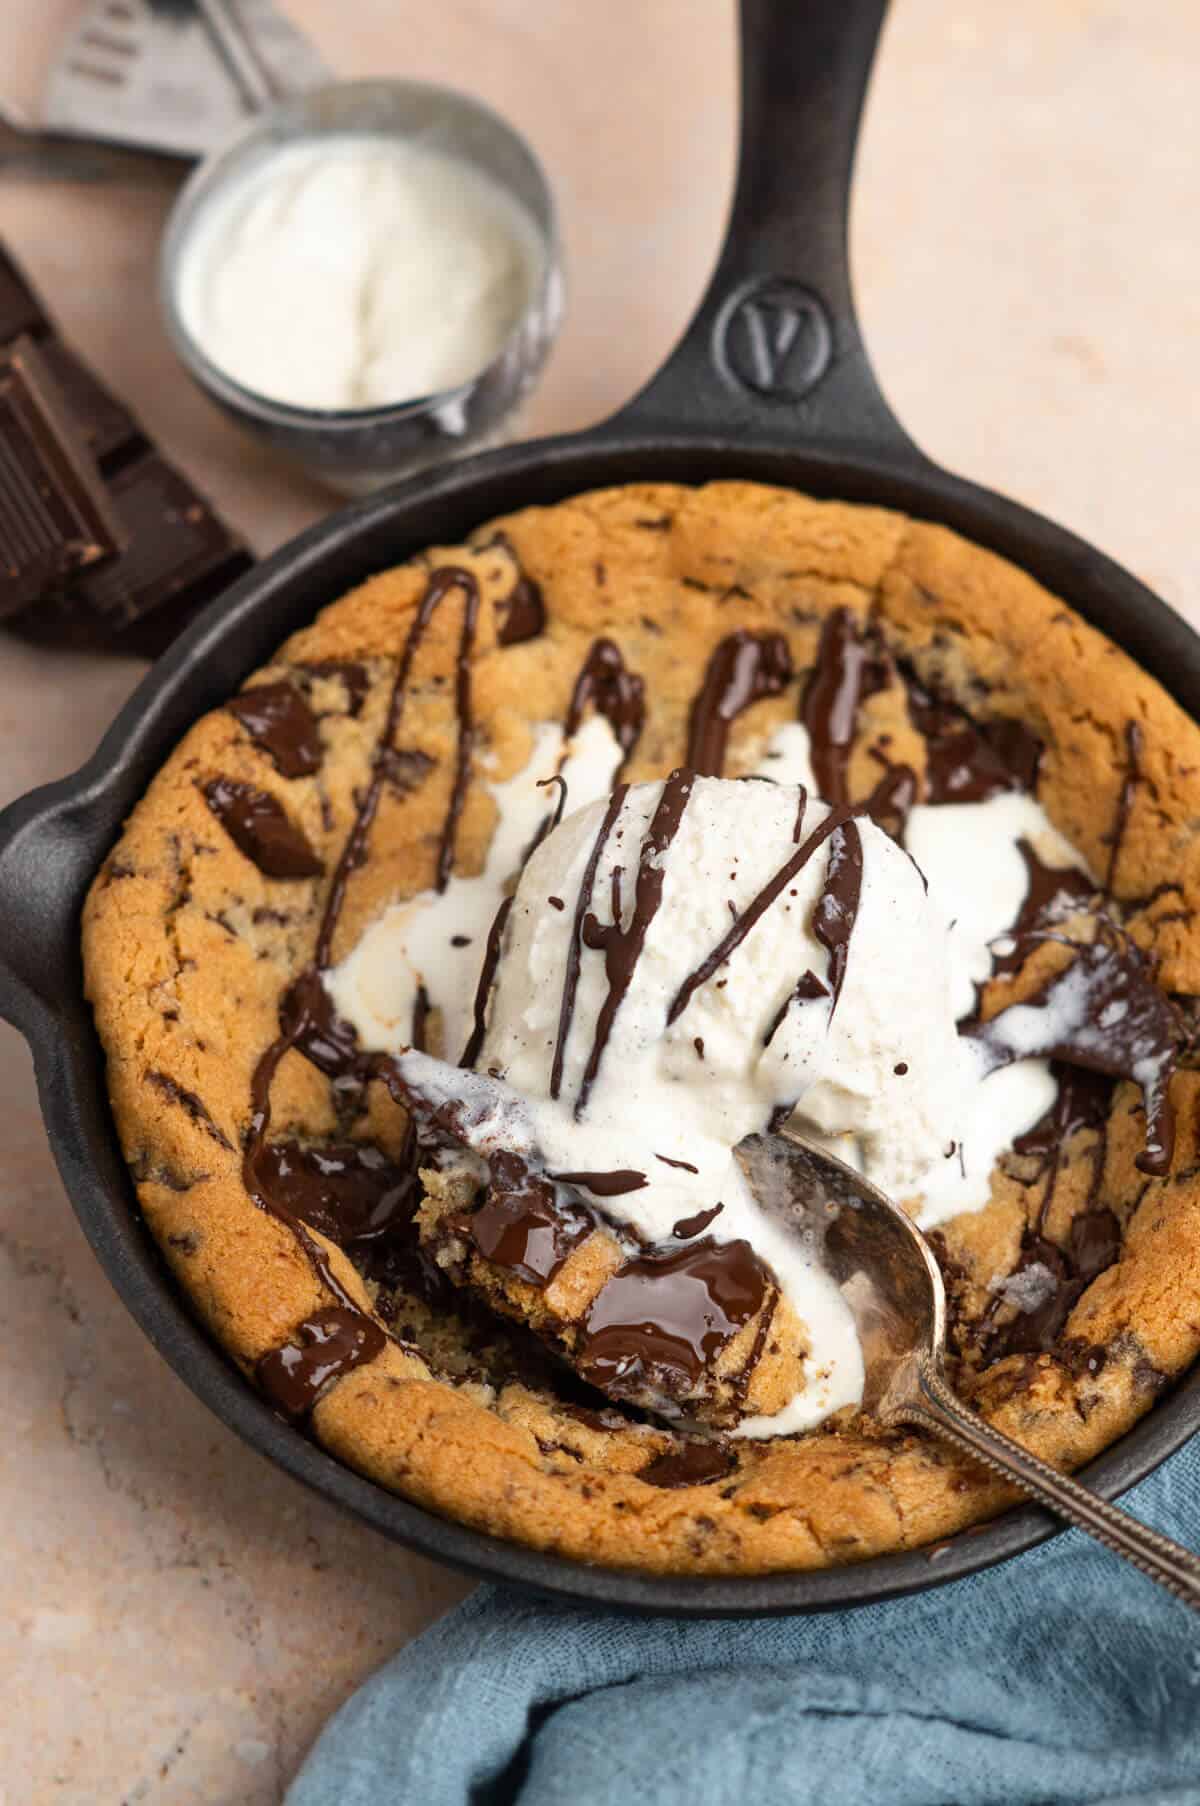 A baked chocolate chip cookie mini skillet with vanilla ice cream and a drizzle of melted chocolate.